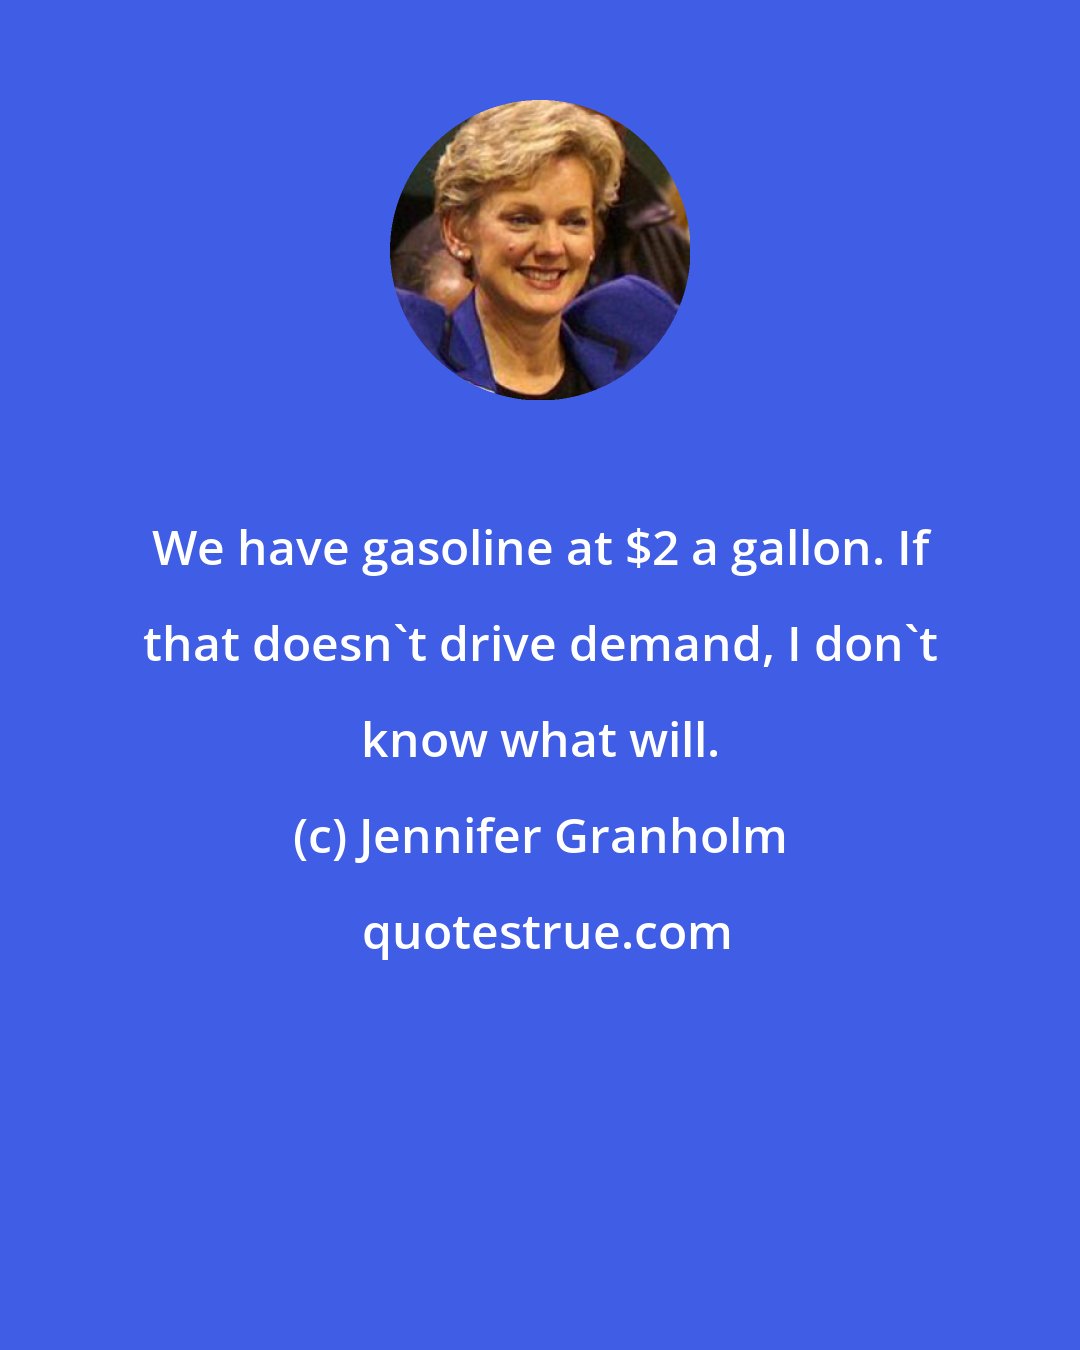 Jennifer Granholm: We have gasoline at $2 a gallon. If that doesn't drive demand, I don't know what will.